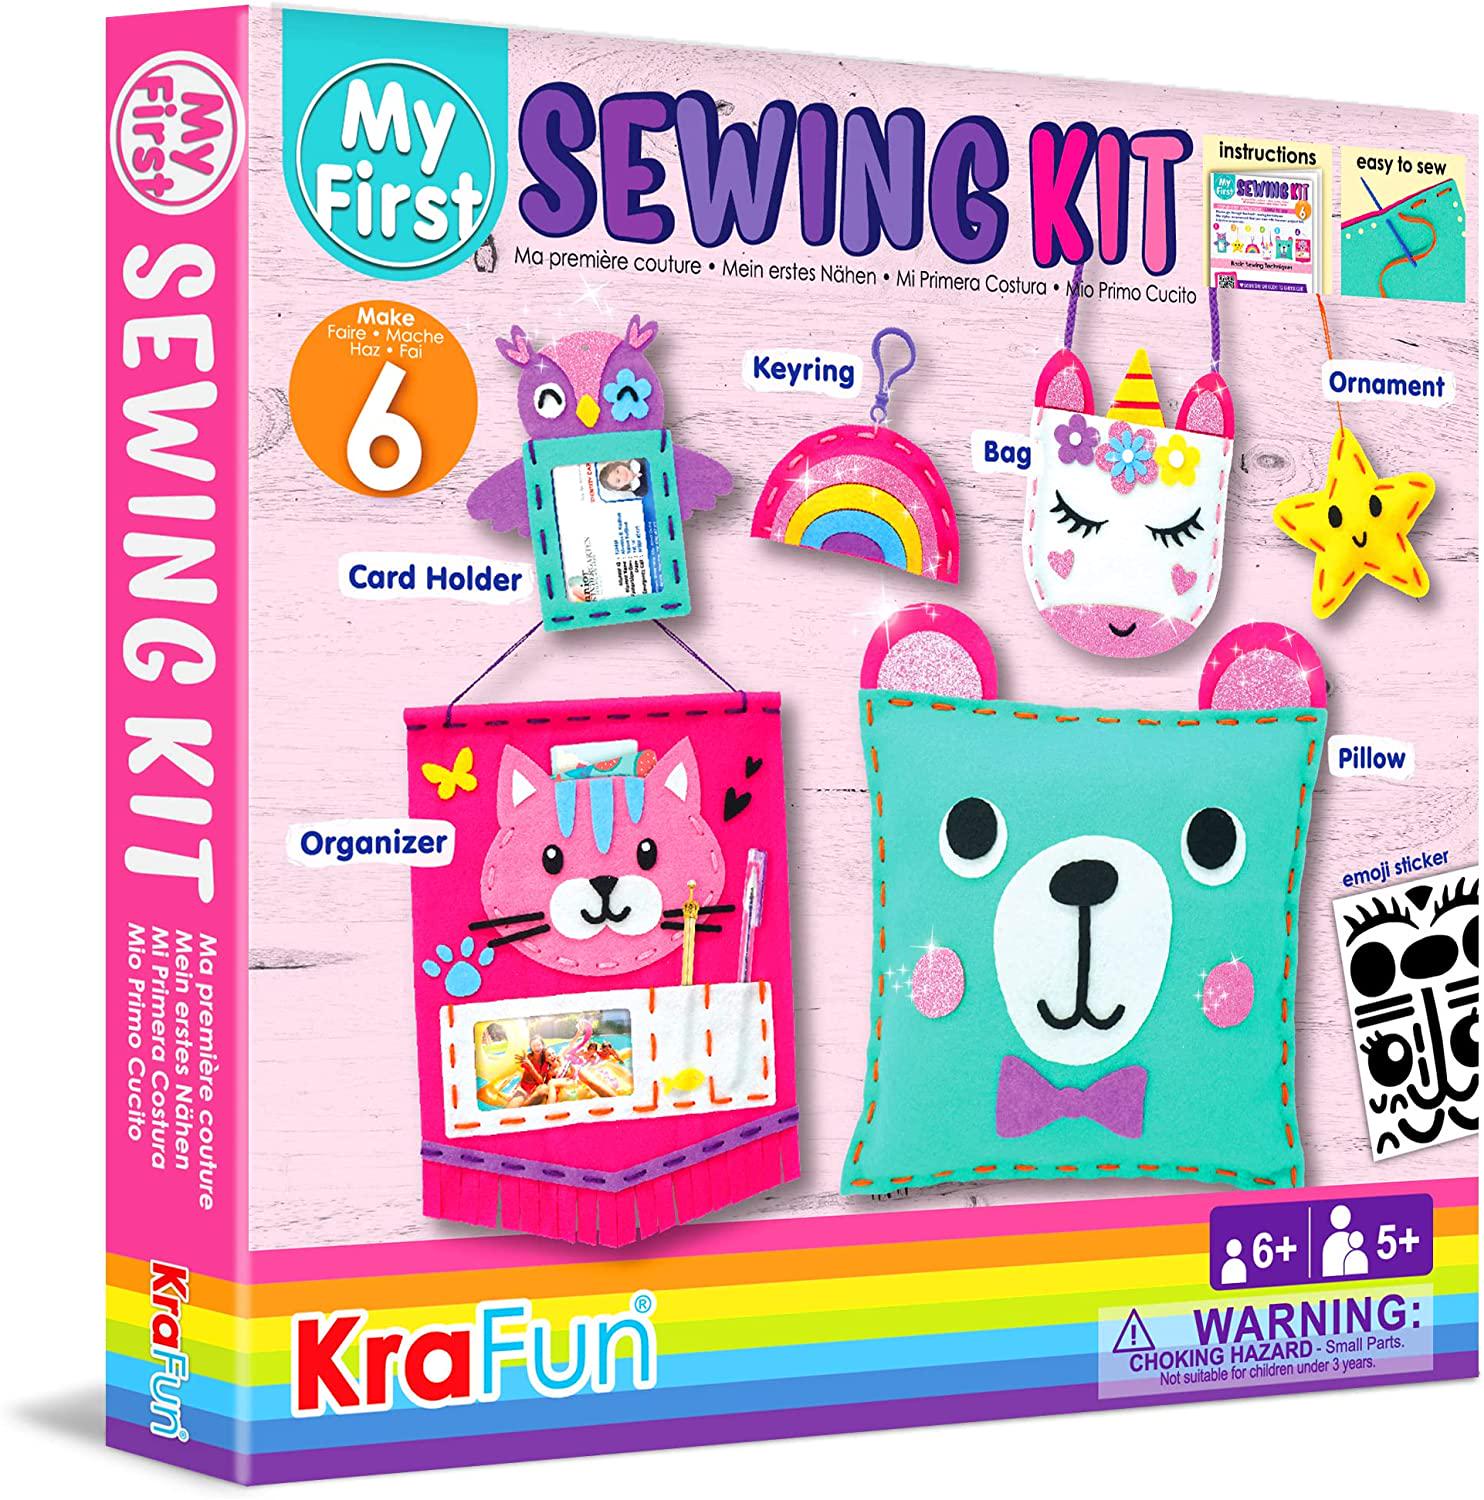 KRAFUN, KRAFUN Beginner My First Sewing Kit for Kids Art and Craft, Includes 6 Easy Projects Stitch Stuffed Animal Dolls and Plush Craft Pillow, Instruction and Felt Materials for Learn to Sew, Embroidery Skills